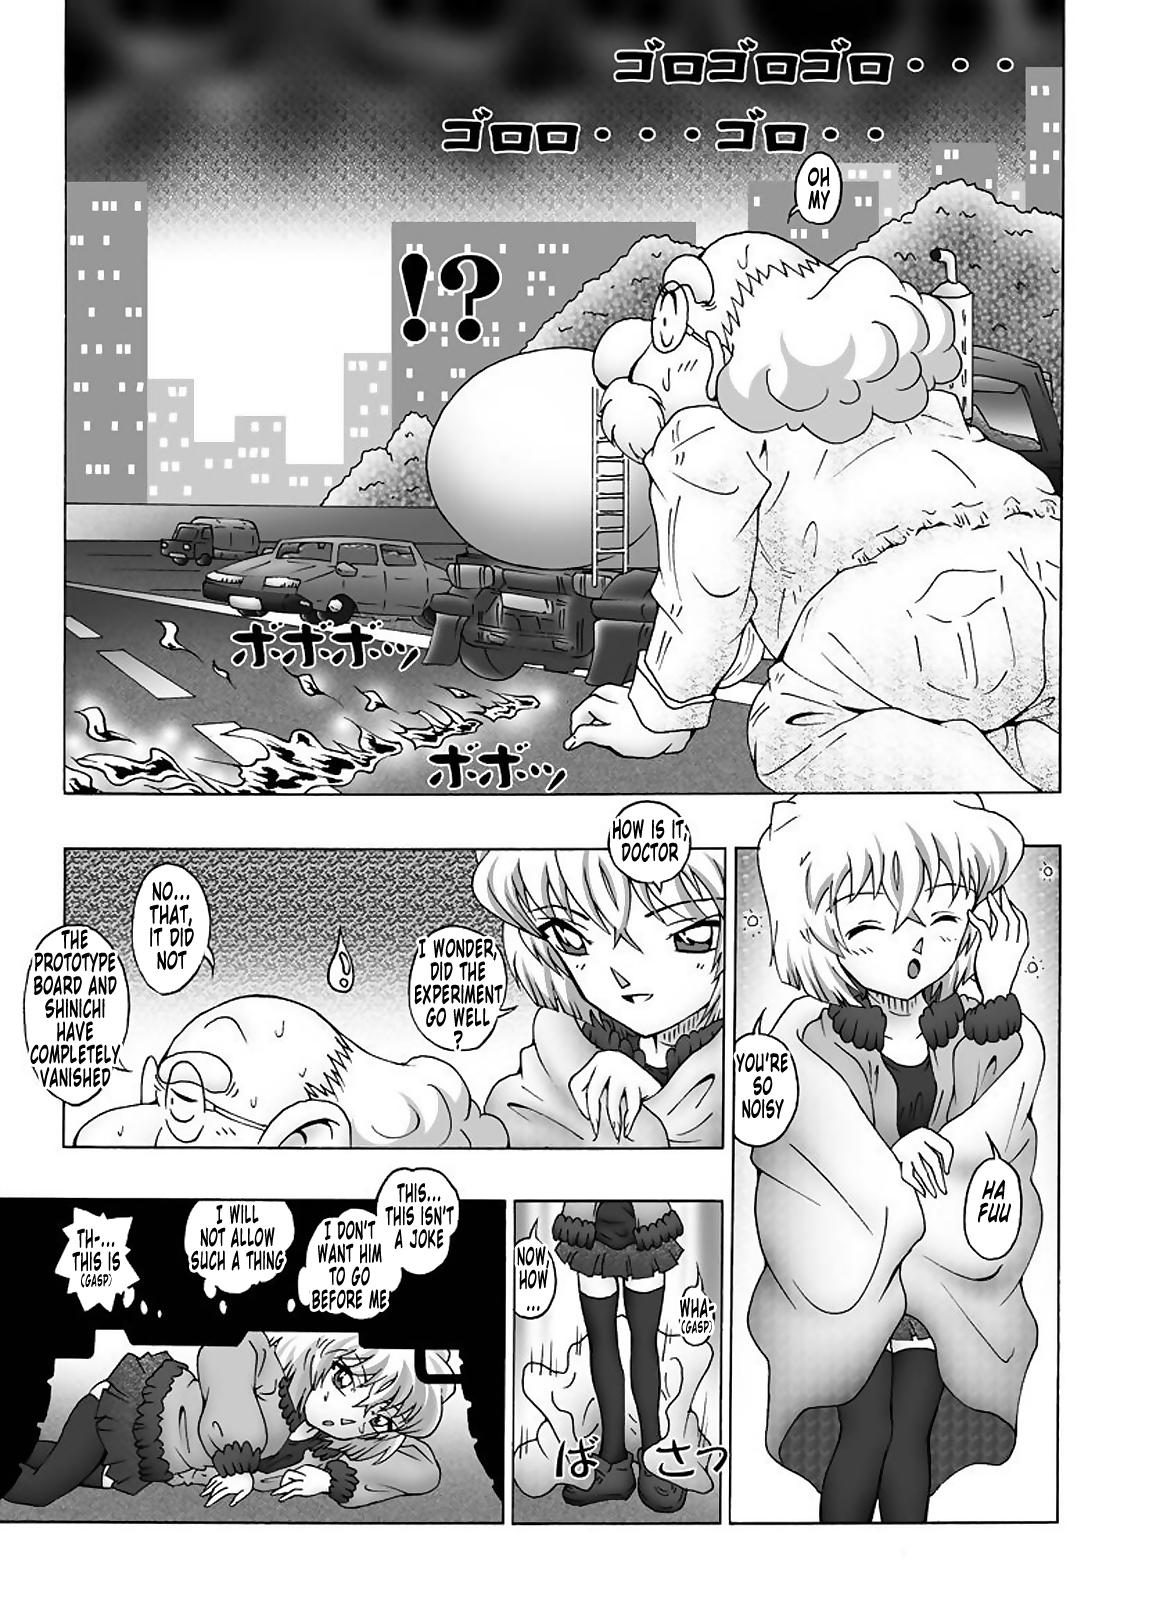 Foot Bumbling Detective Conan - File 12: The Case of Back To The Future - Detective conan Parody - Page 6